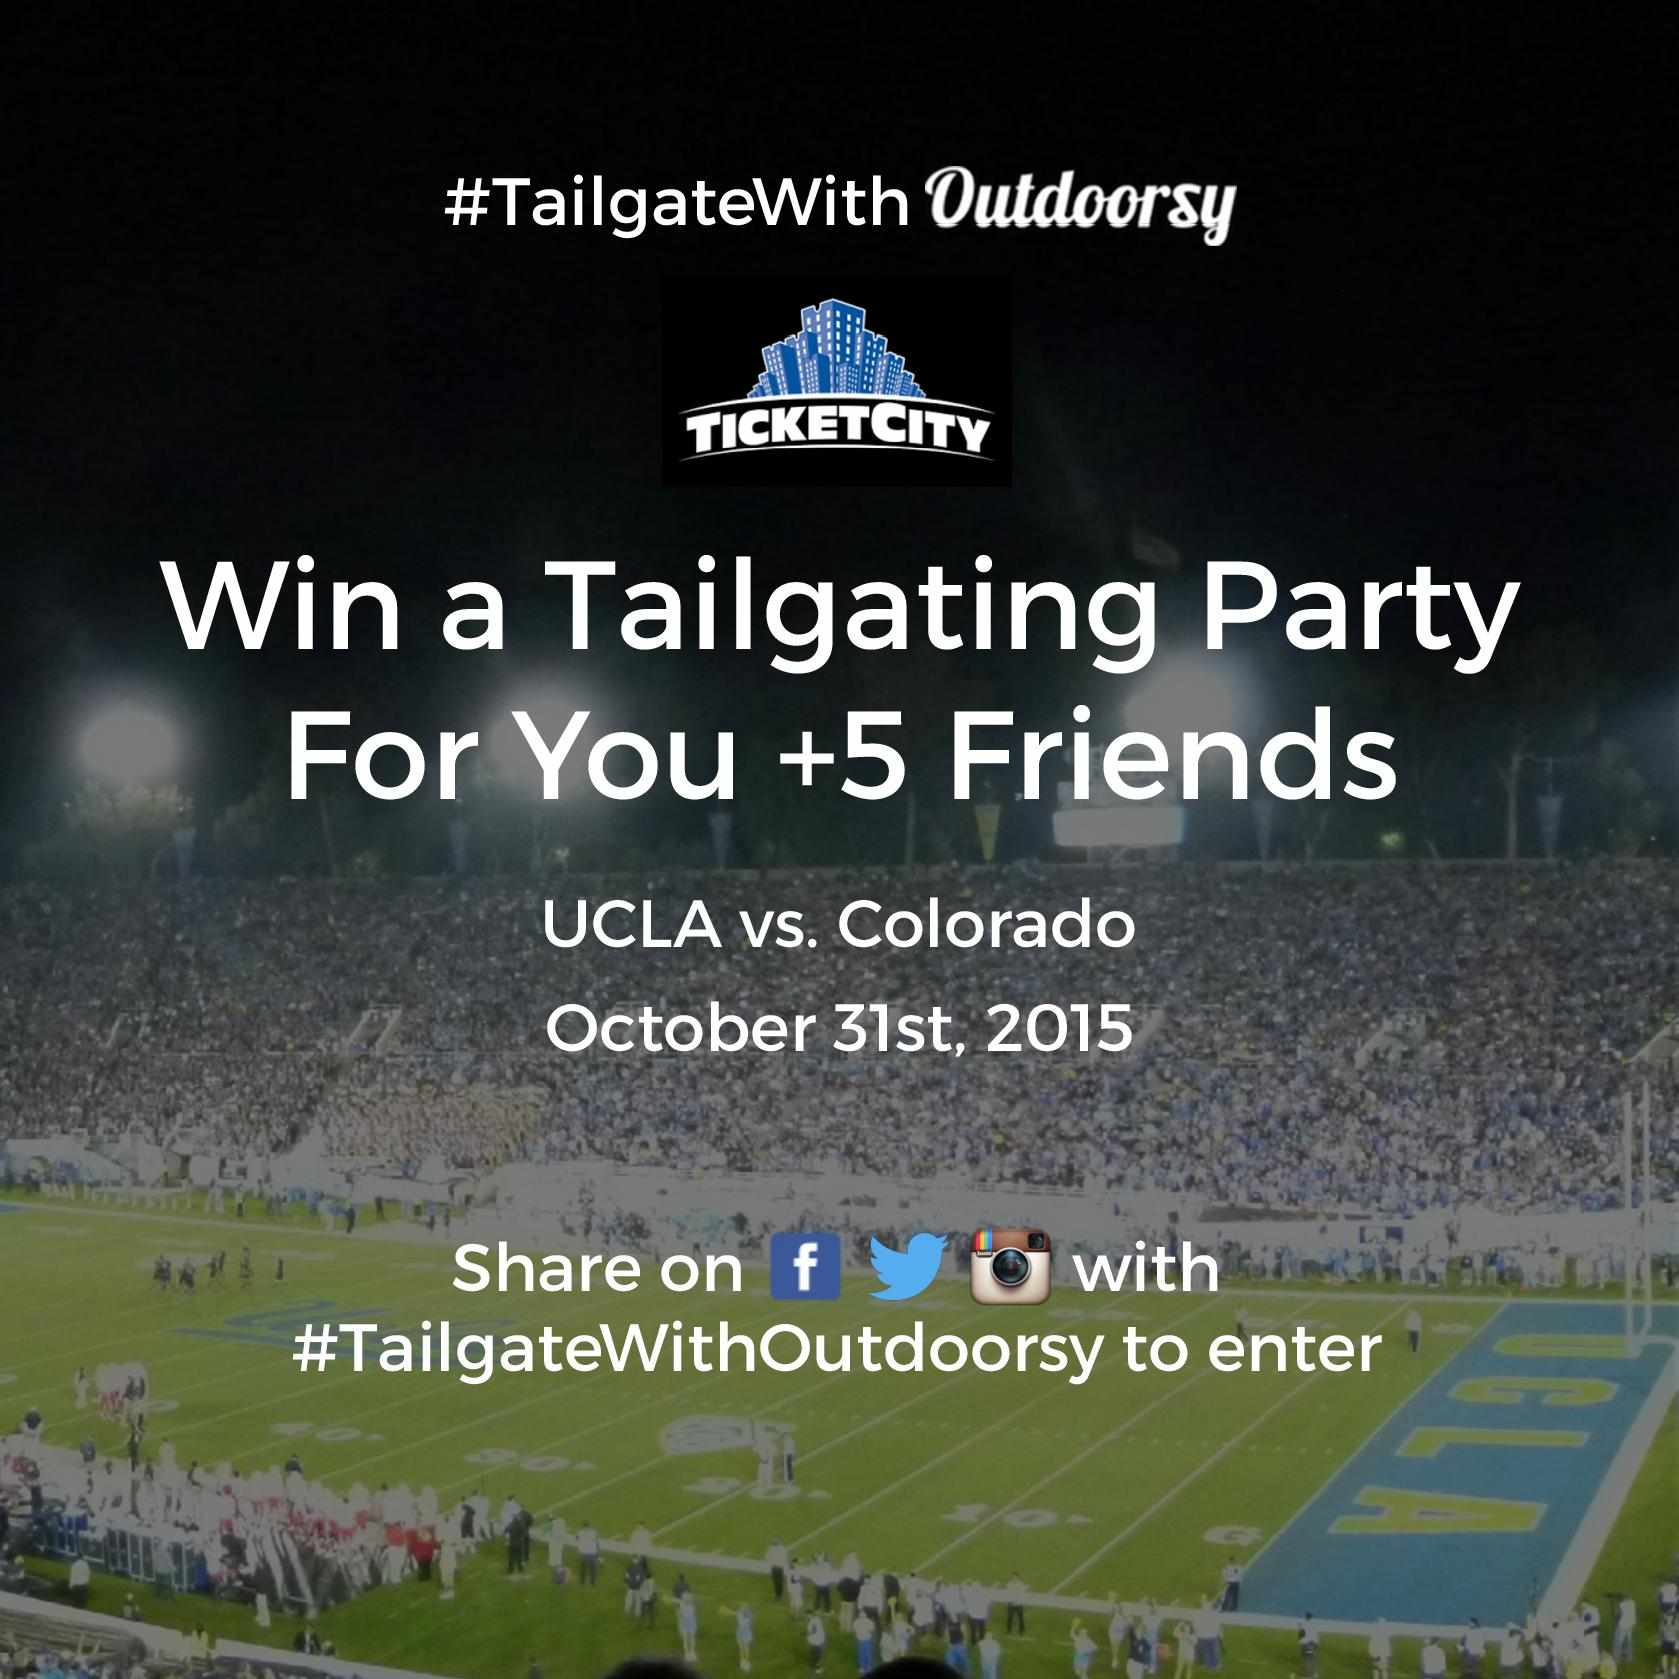 Enter Outdoorsy&#8217;s ultimate tailgating giveaway